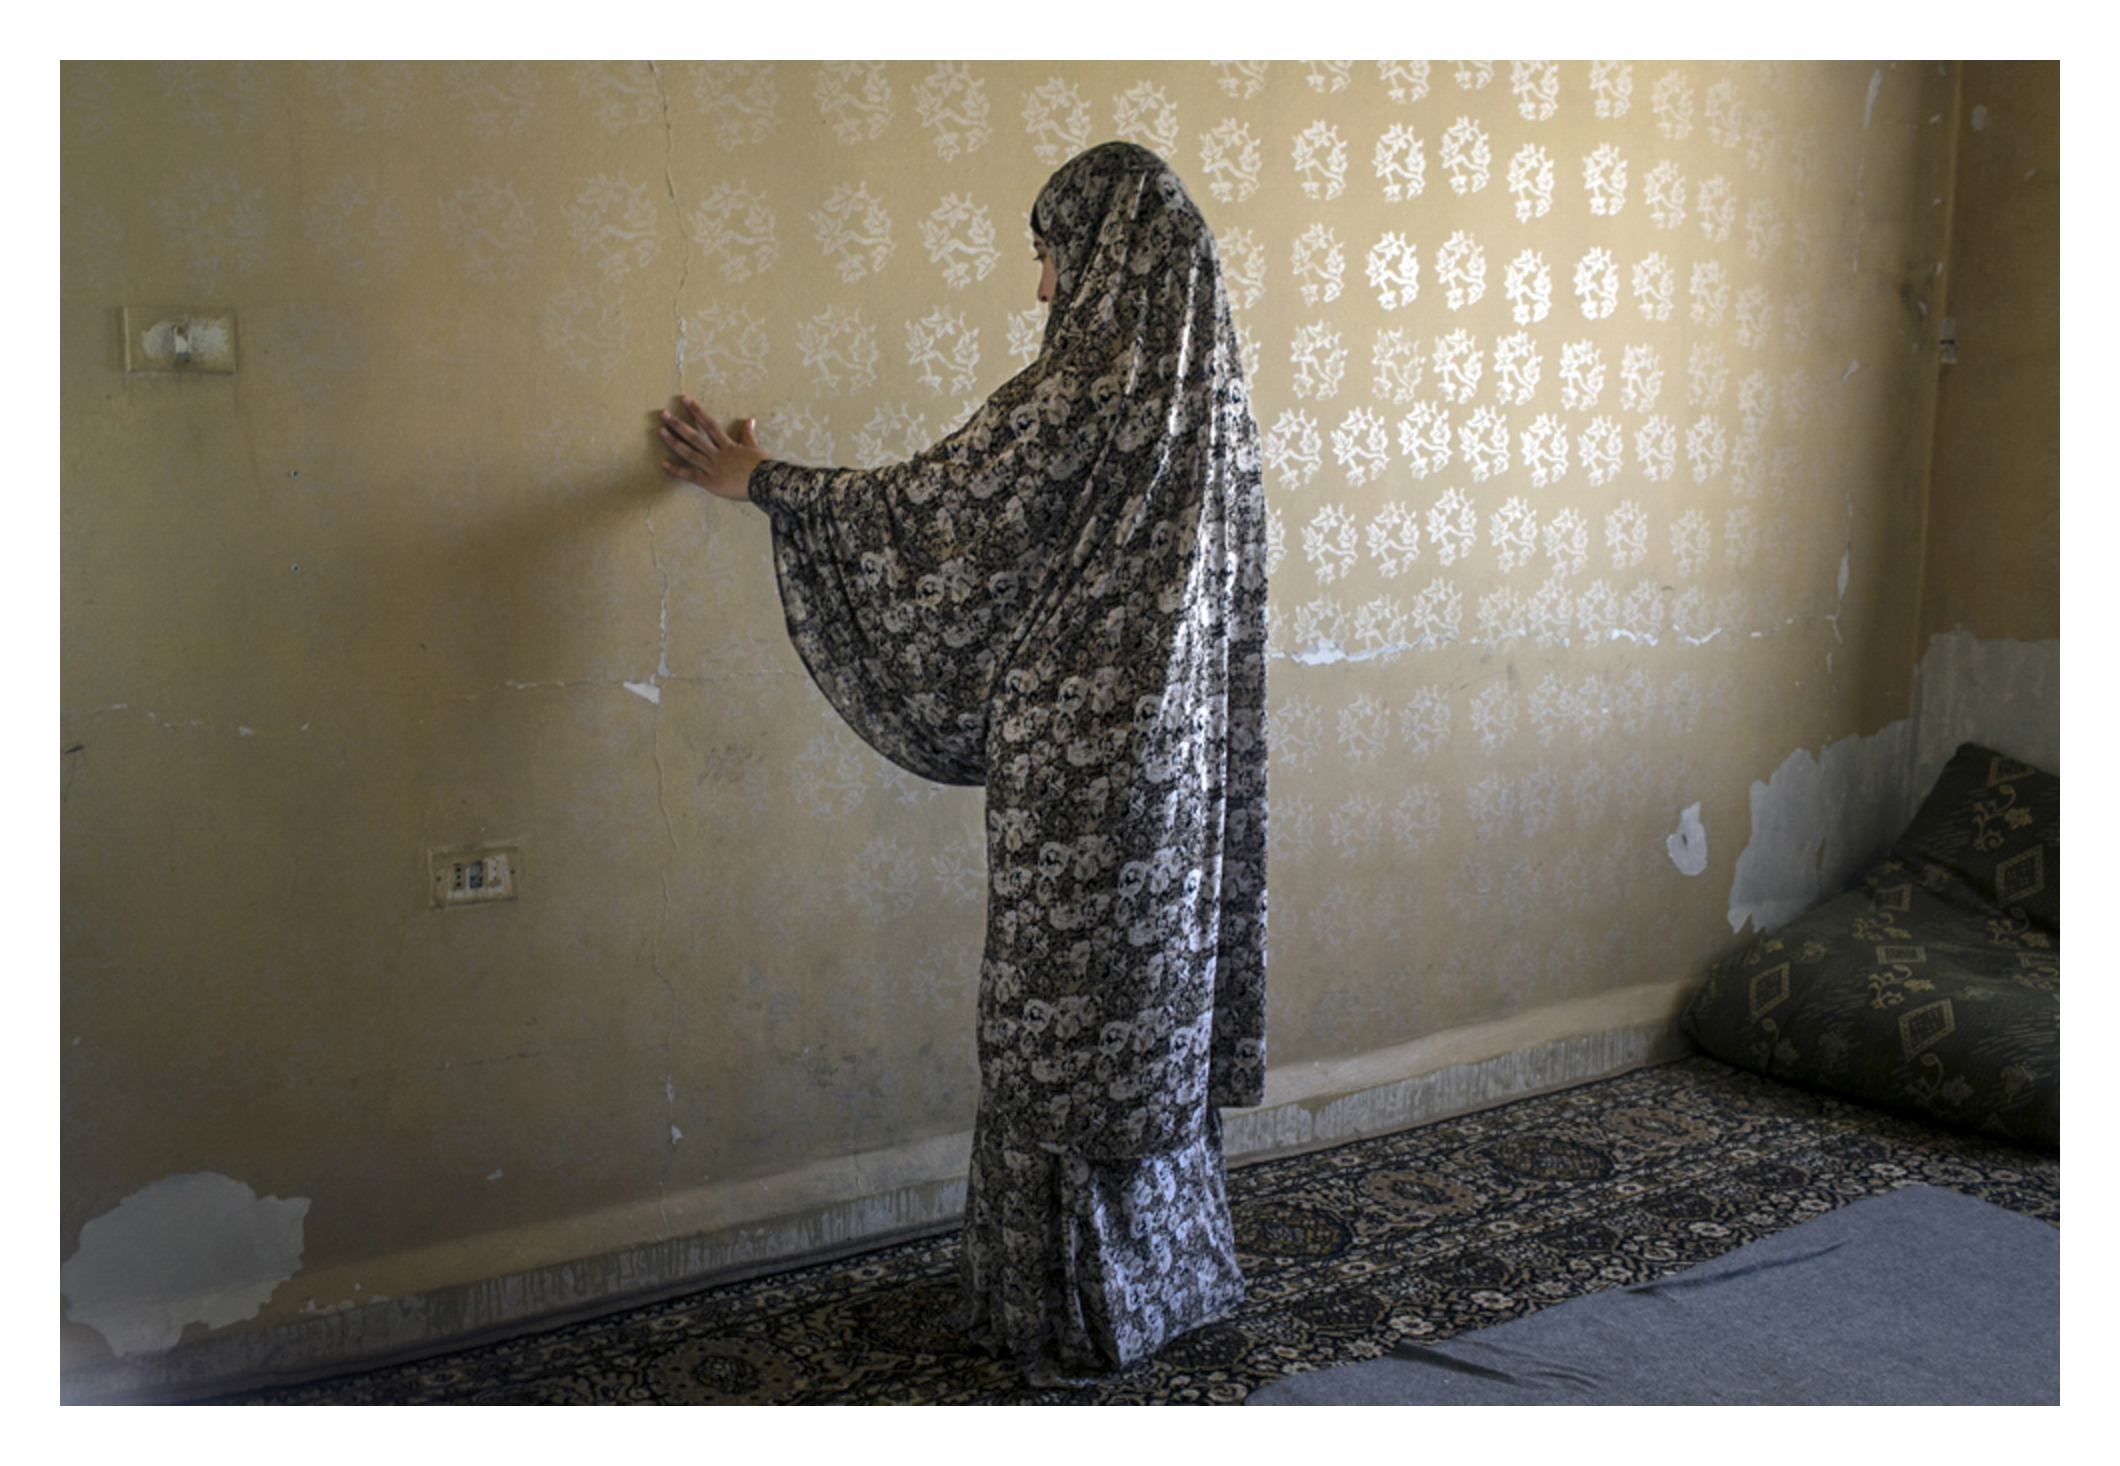  "Kill me instead." 

Fadia, 19, traces the cracks in her rented apartment as she describes death of her father. He was killed in his bed, returning home from his work exhausted, as a laborer. Shortly before morning prayers, the security forces enter